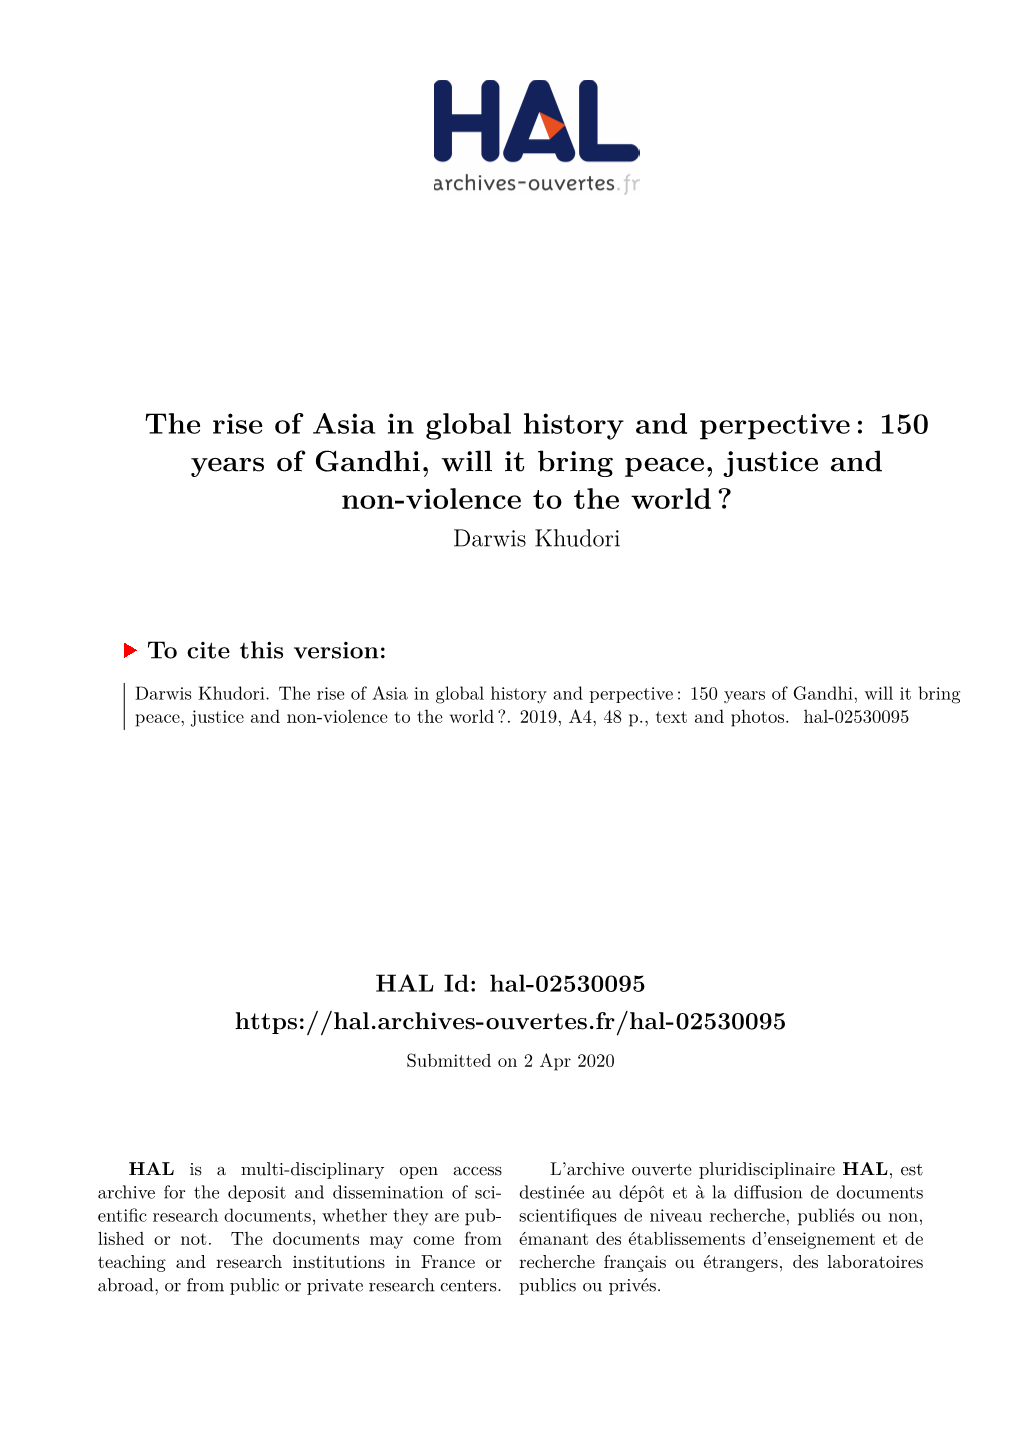 The Rise of Asia in Global History and Perpective : 150 Years of Gandhi, Will It Bring Peace, Justice and Non-Violence to the World ? Darwis Khudori